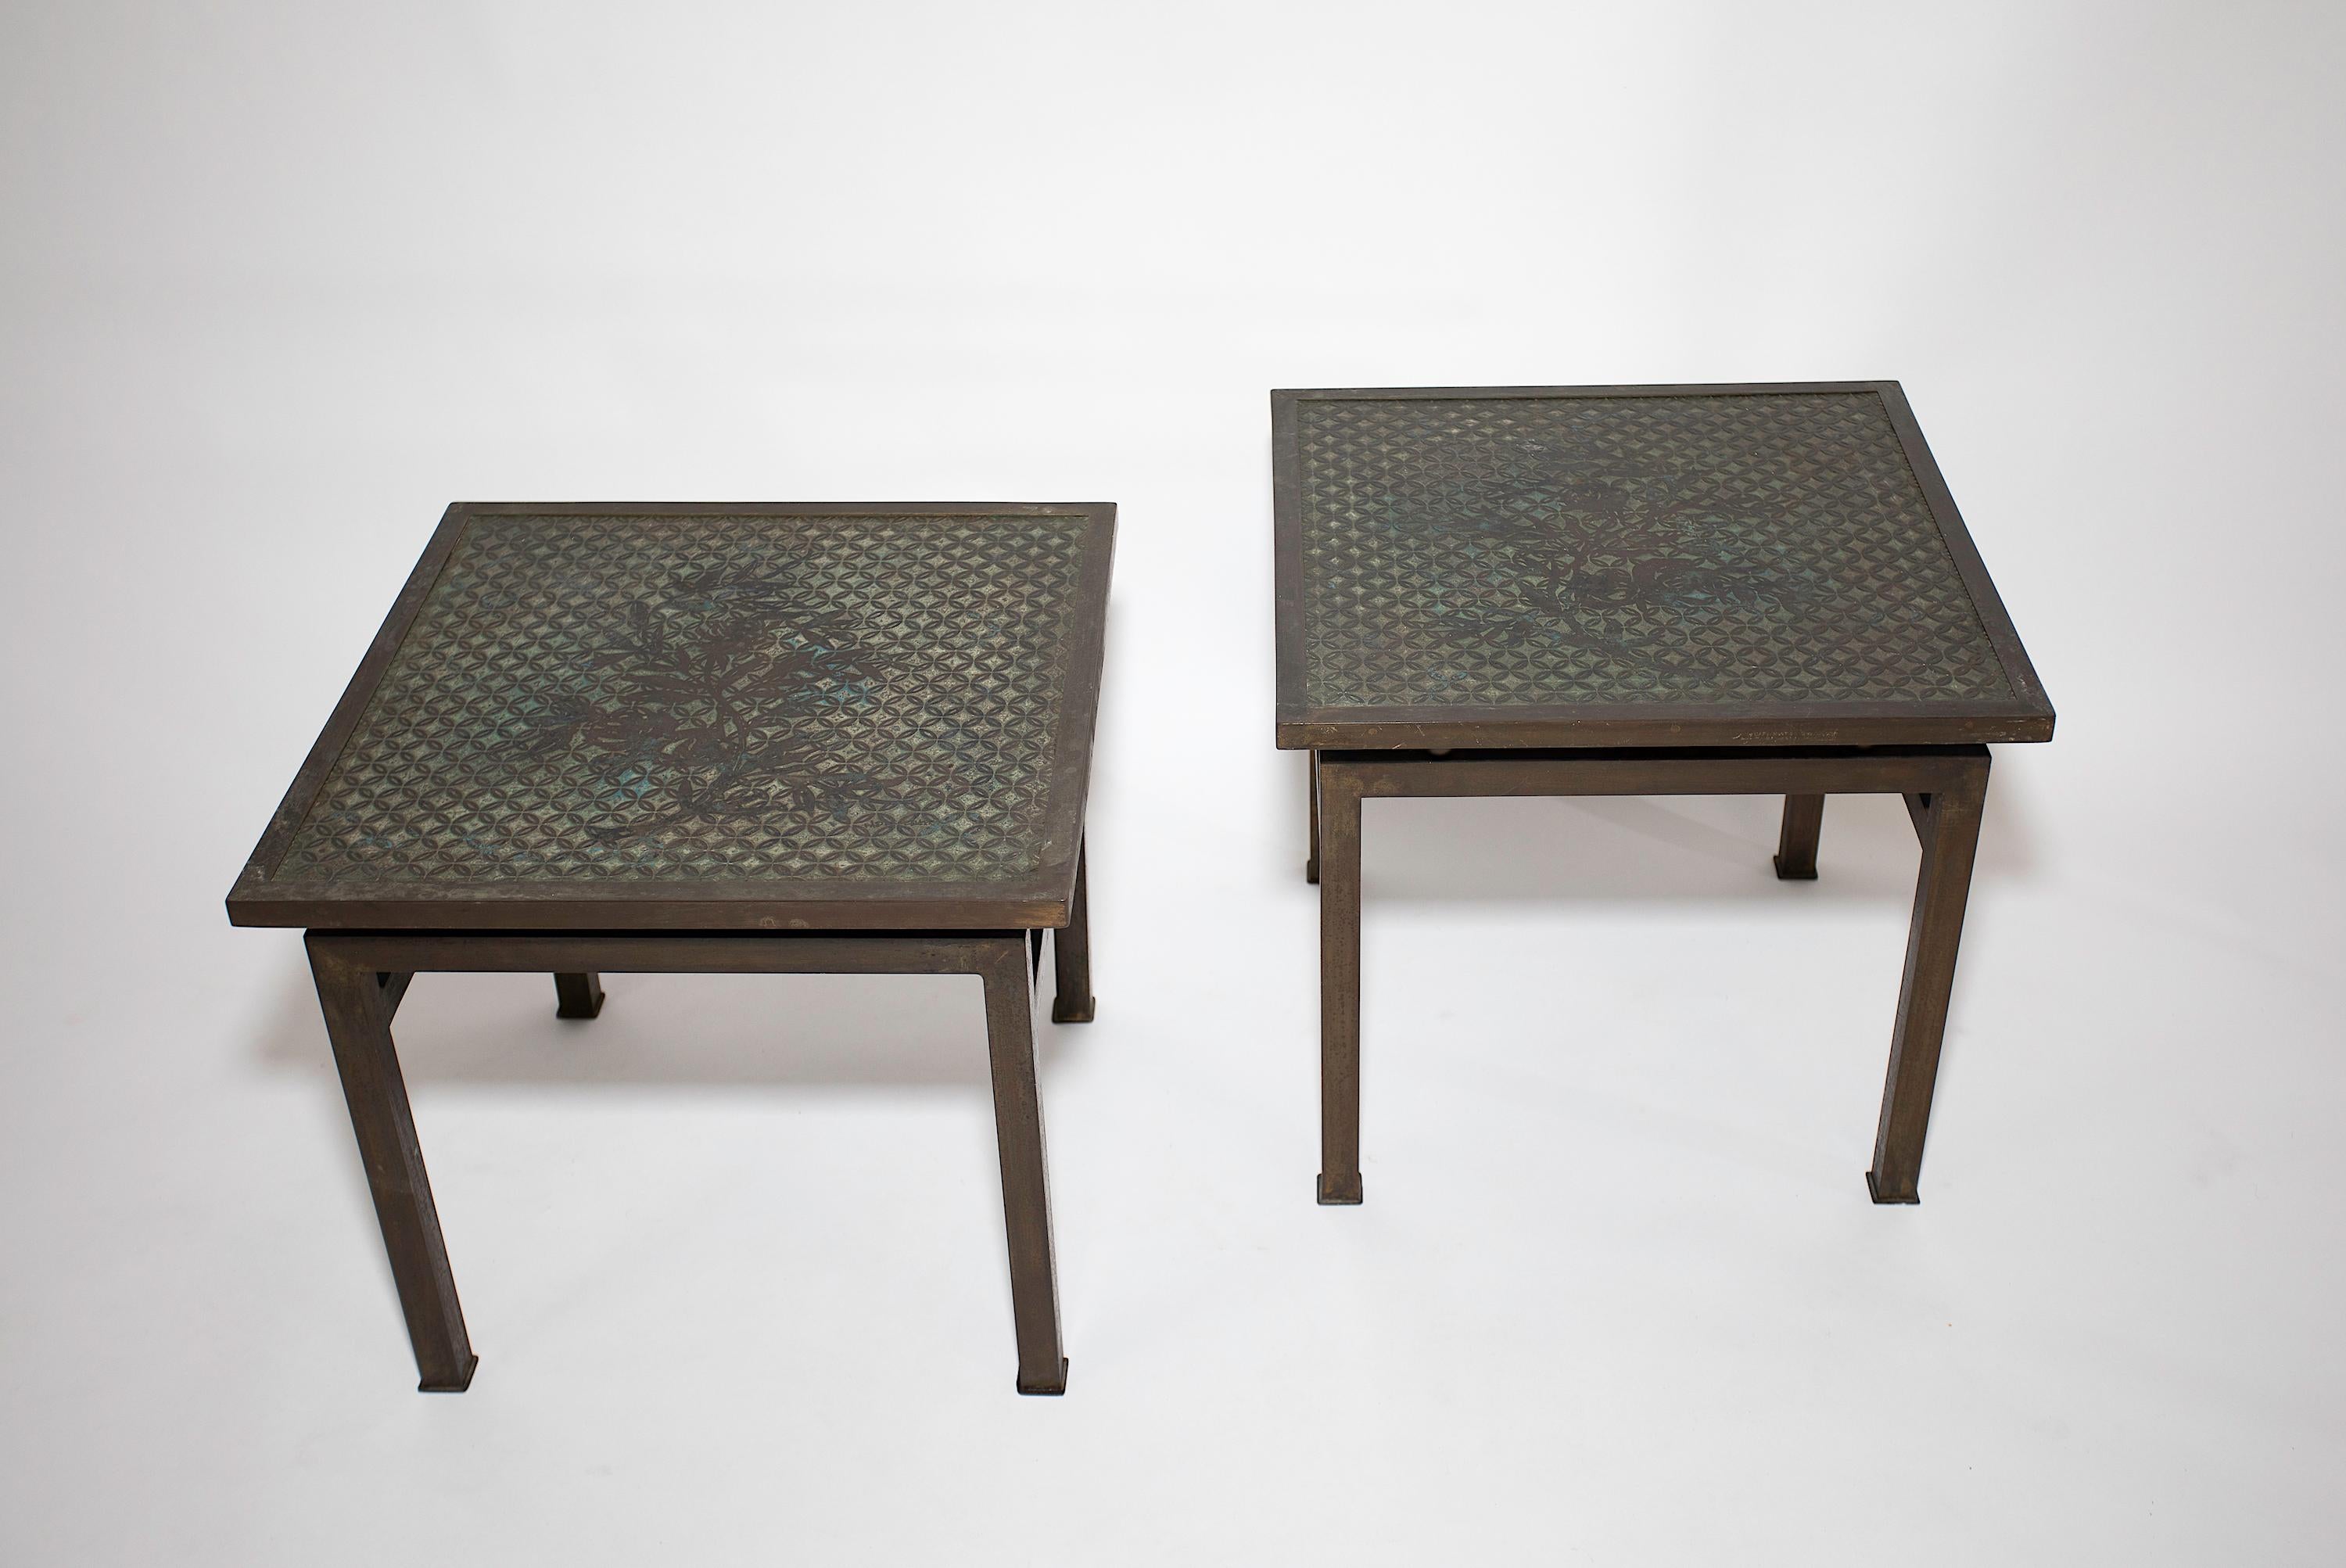 A matched pair of Laverne Kuan Su Tables.
Original surface.
Signed ontop.